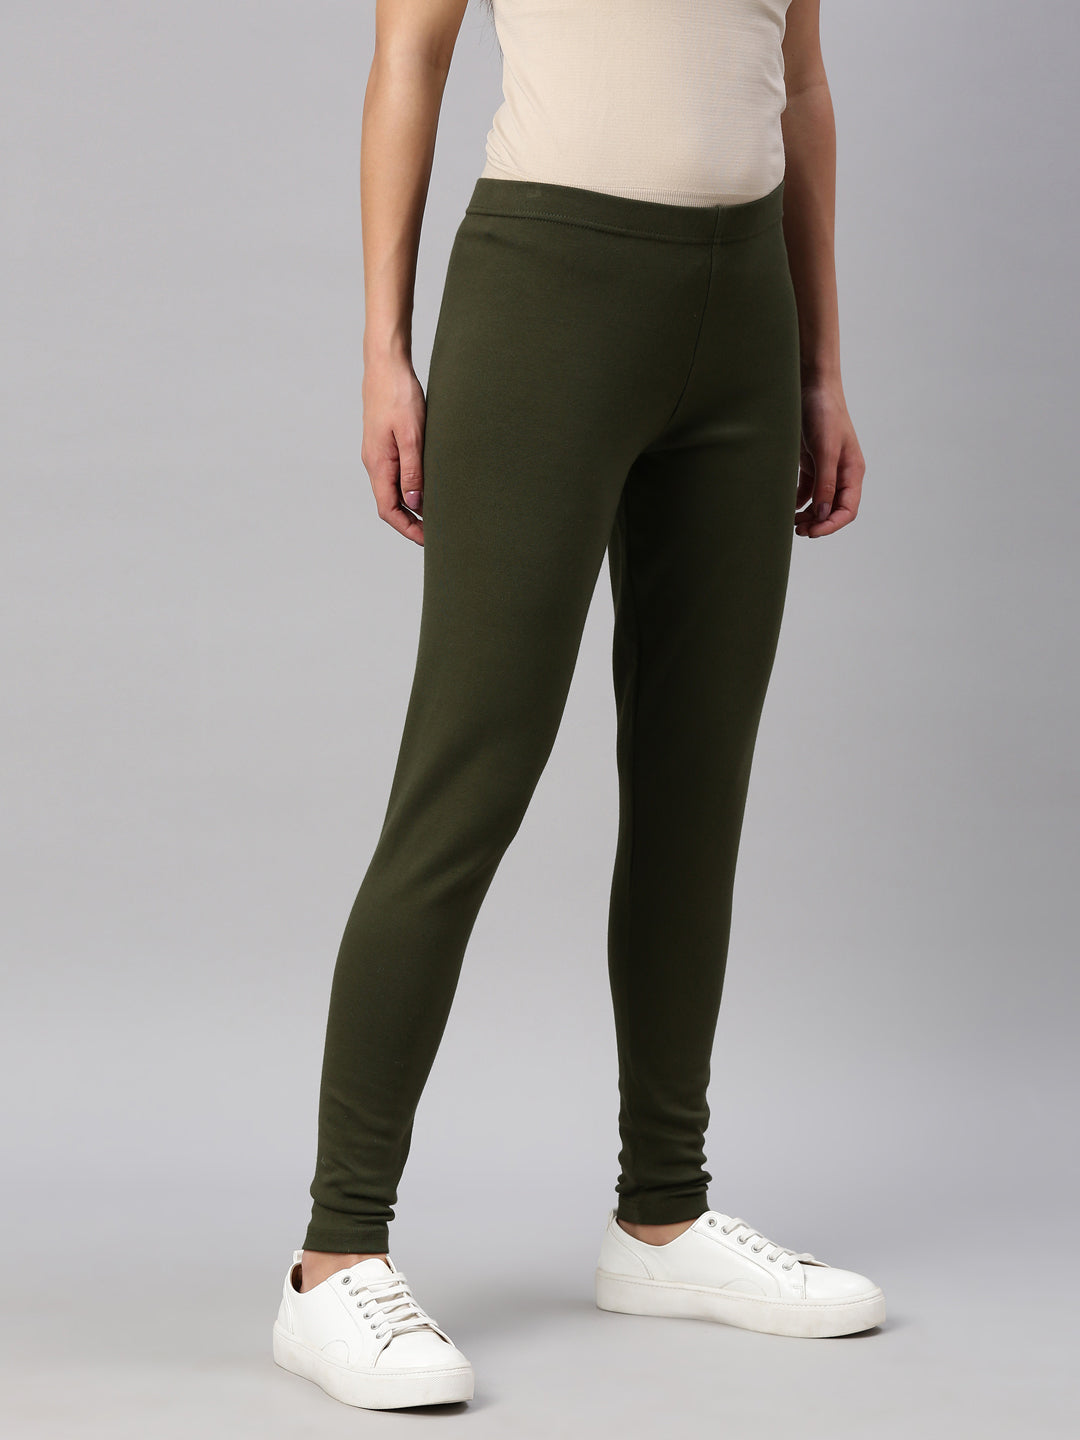 Leggings Wholesale Online | International Society of Precision Agriculture